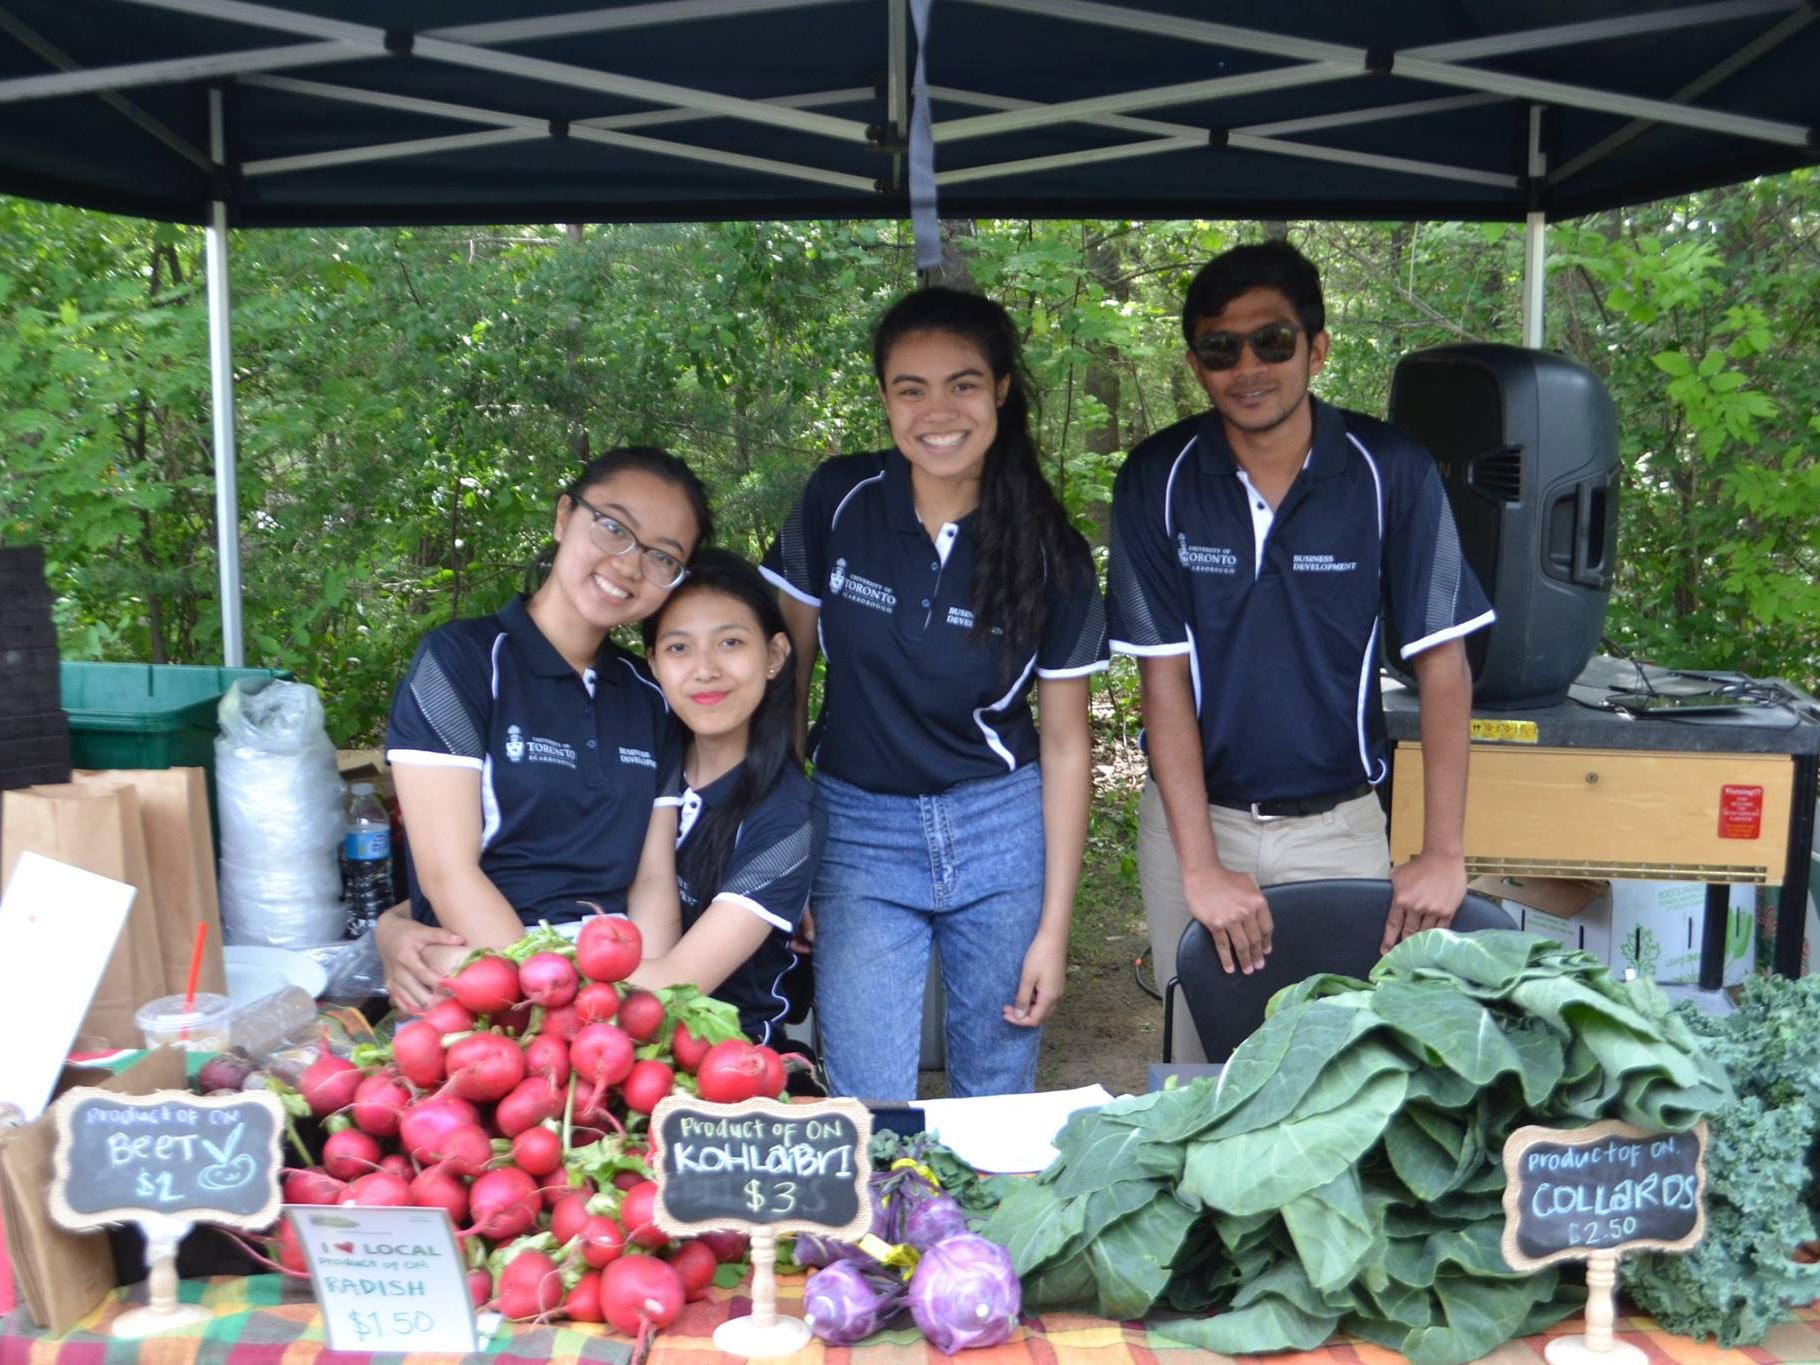 Image of produce on a table with four students standing behind the table